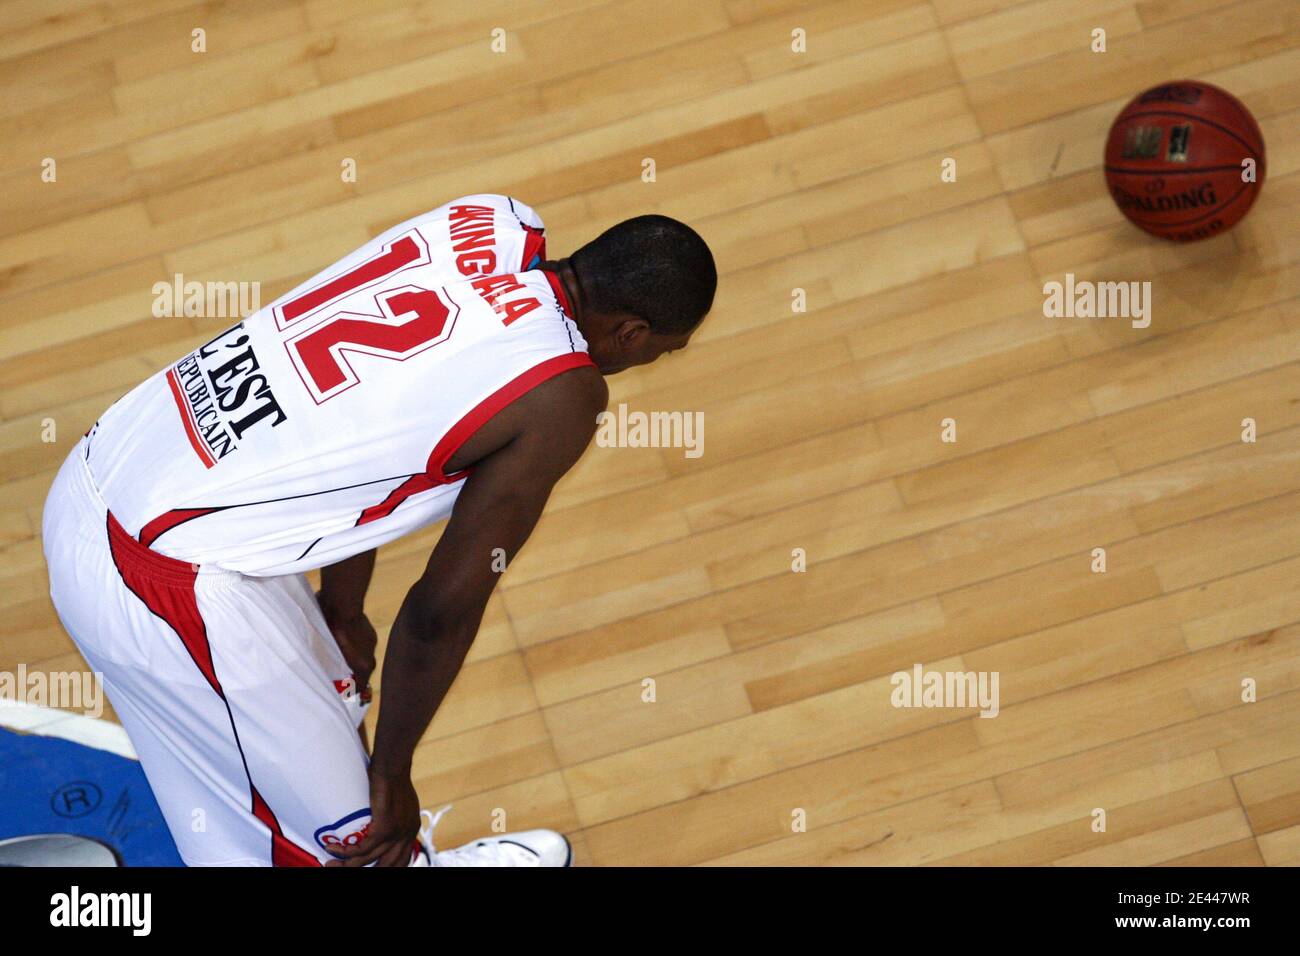 Nancy's Akin Akingbala during the French Pro A basketball match, SLUC Nancy vs MSB Le Mans at Jean Weille Hall in Nancy, France on on April 24, 2009. Photo by Mathieu Cugnot/ABACAPRESS.COM Stock Photo